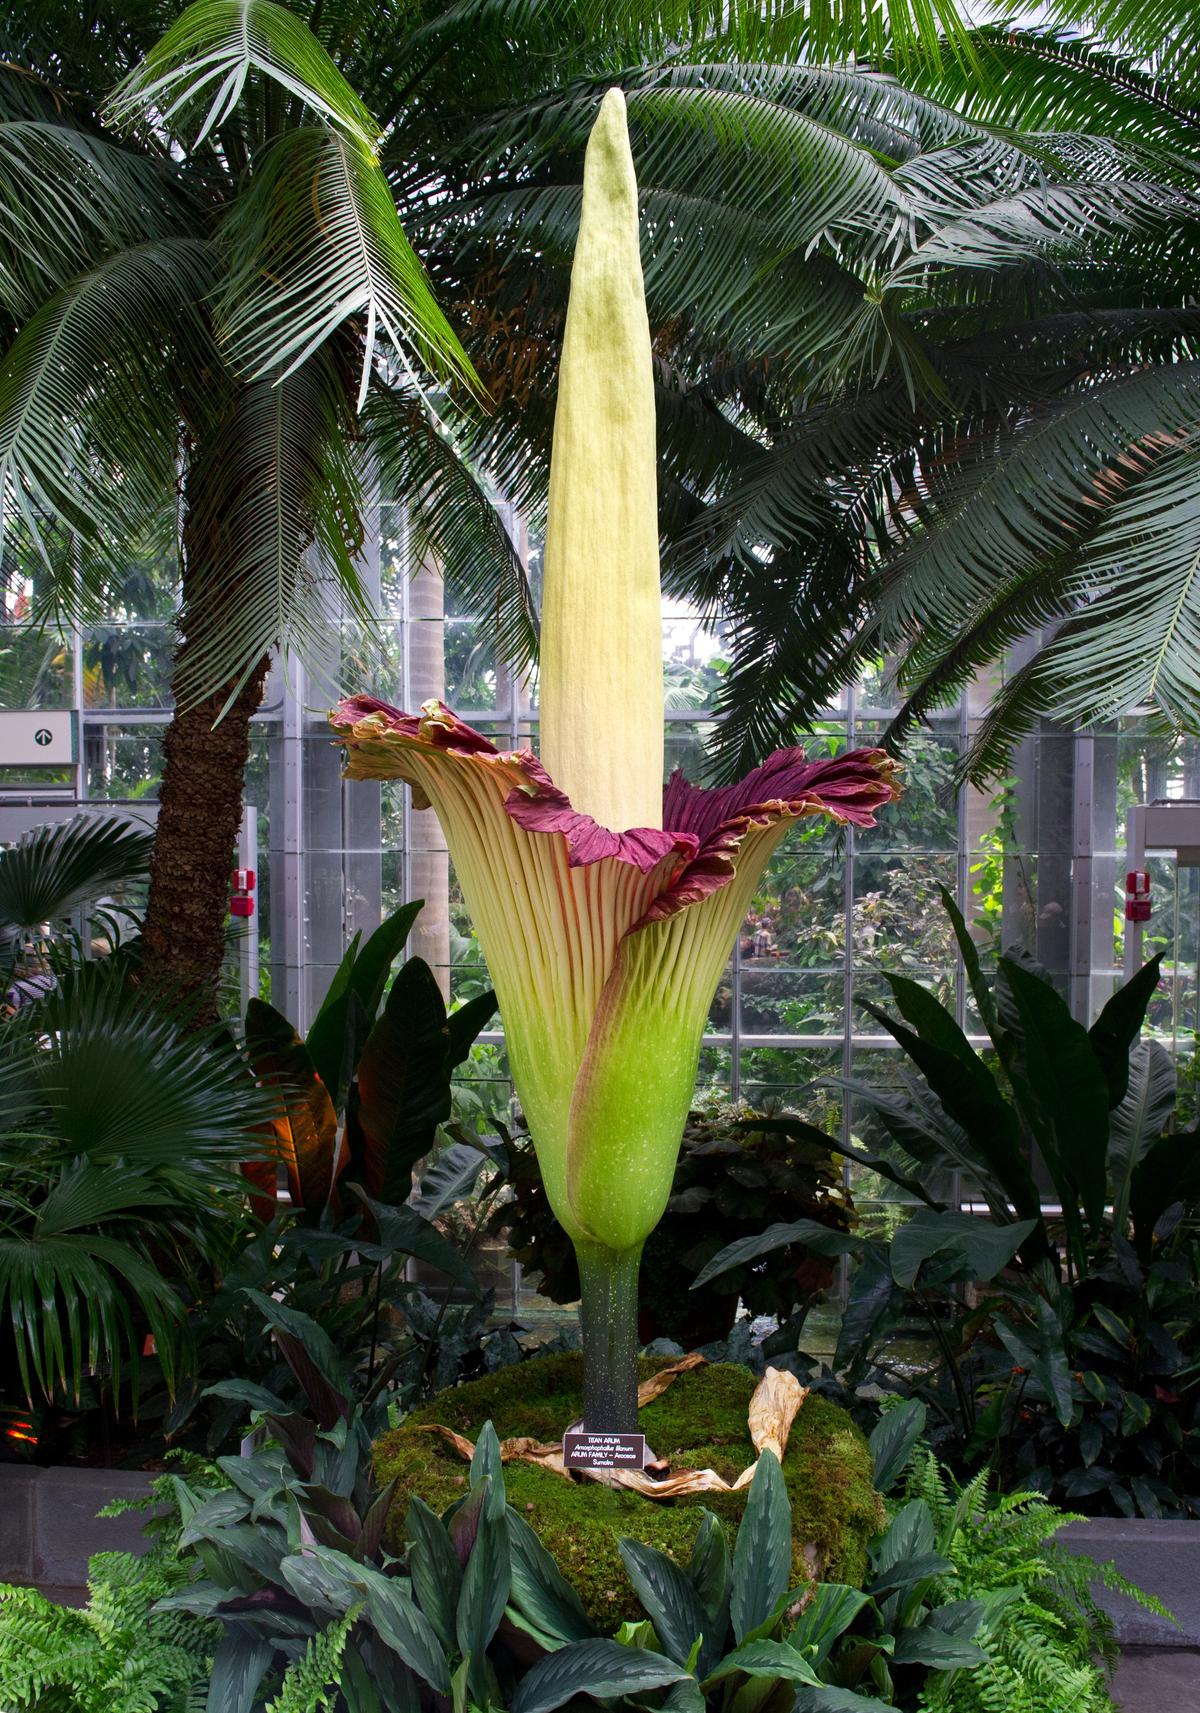 The Titan Arum plant (Amorphophallus titanum), also known as the corpse flower or stinky plant, is seen in full bloom at the United States Botanic Garden Conservatory in Washington, D.C., on July 22, 2013. (Karen Bleier/AFP/Getty Images)